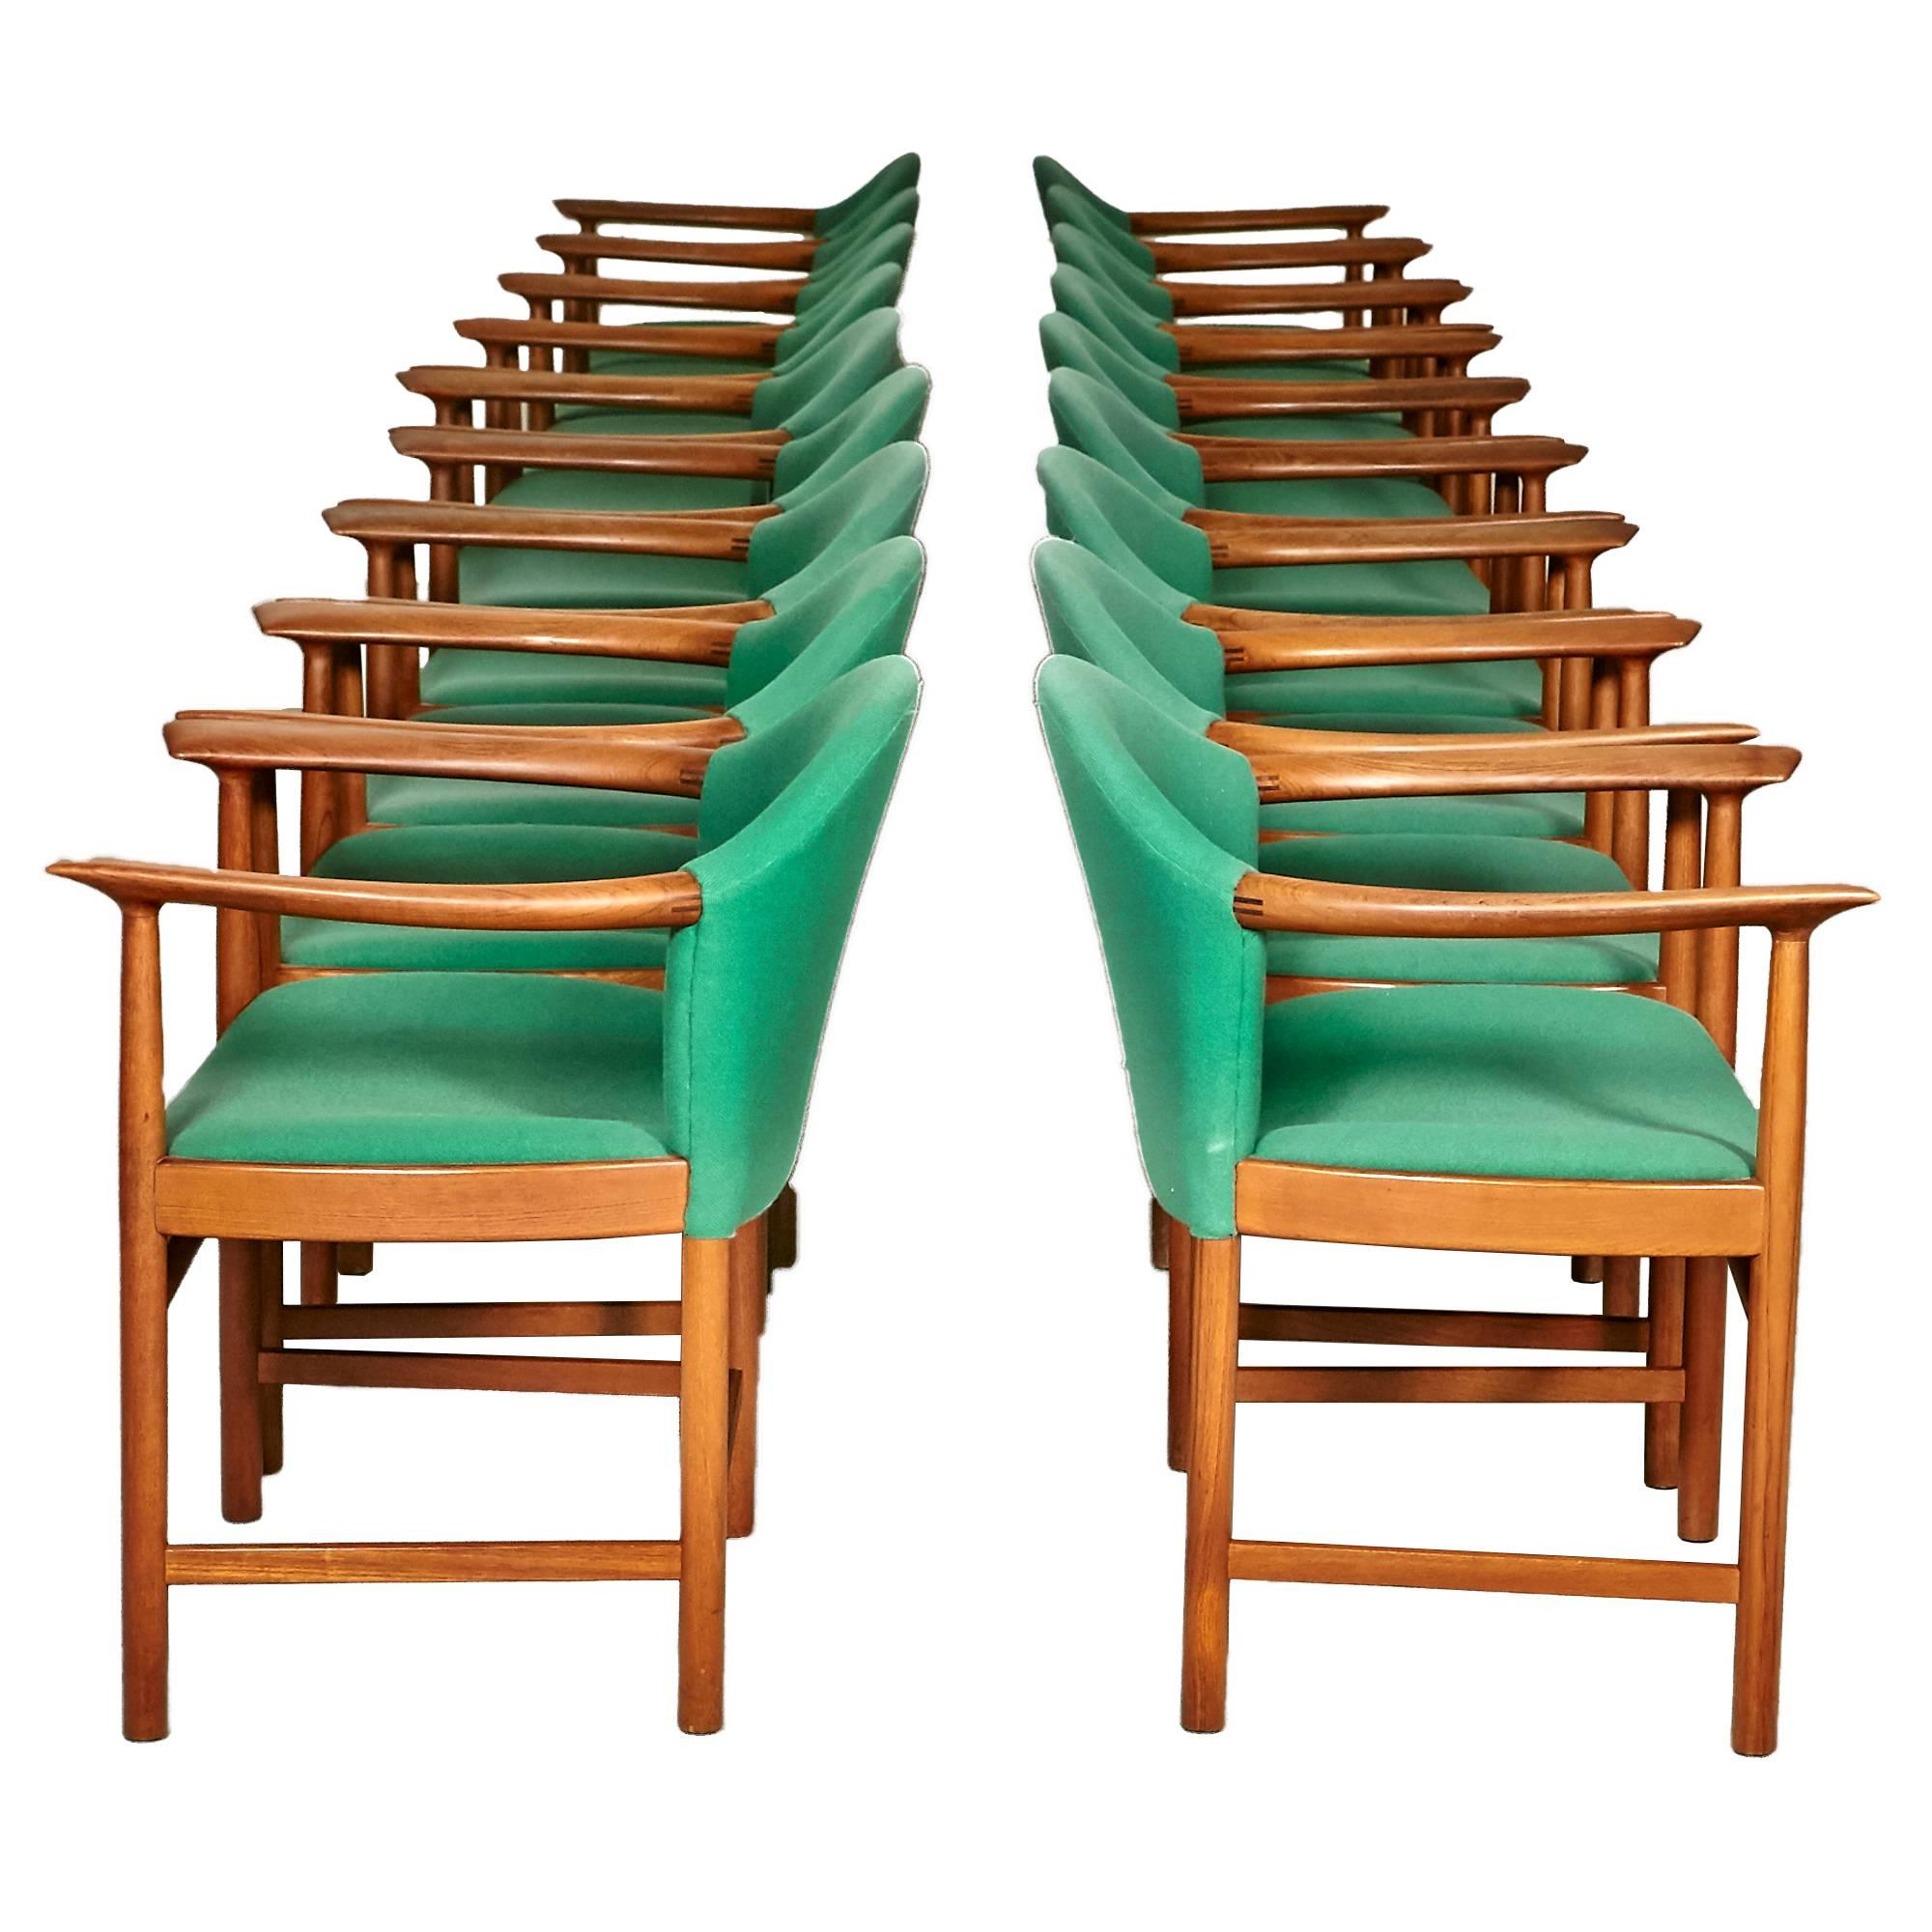 Vintage set of 16 Danish teak rare dining or conference chairs designed by Peter Hvidt. Sculpted teak arms are 27in.H. Price is per piece.